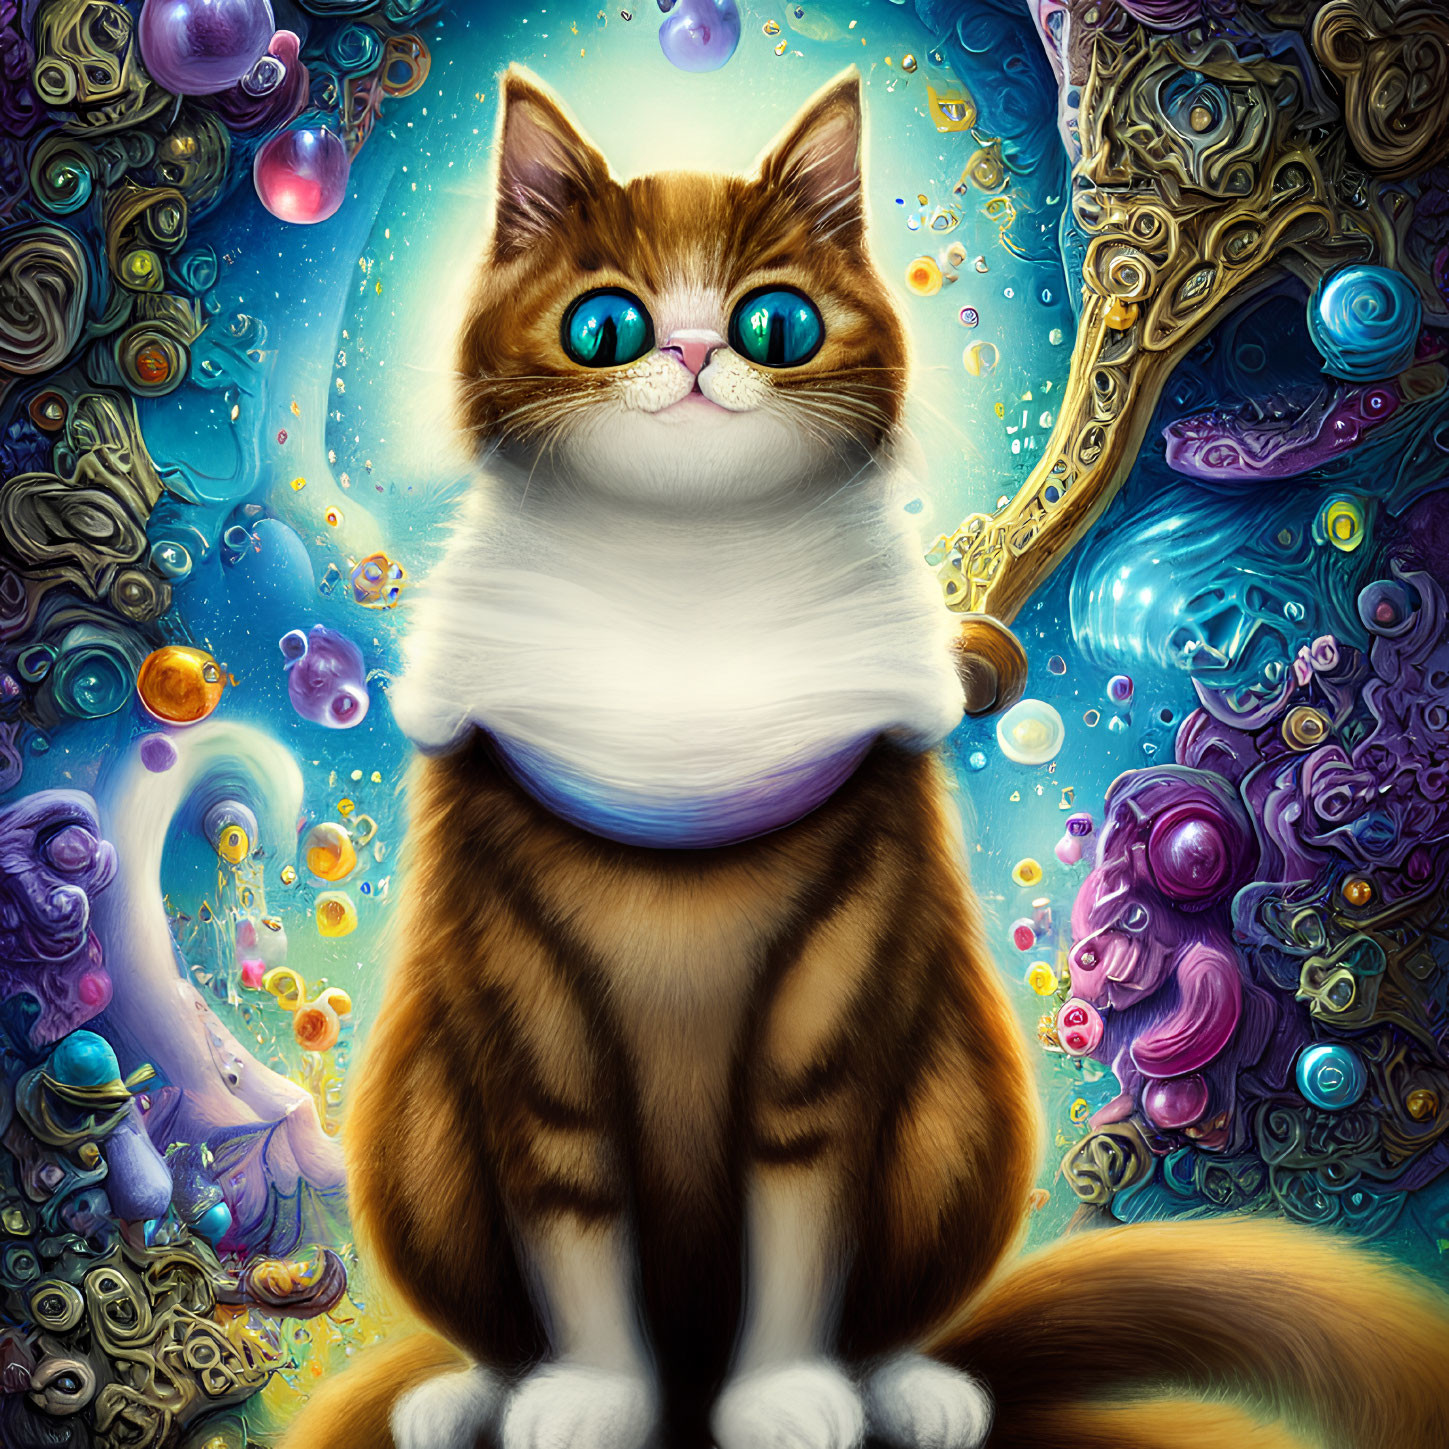 Whimsical brown and white cat illustration with expressive green eyes